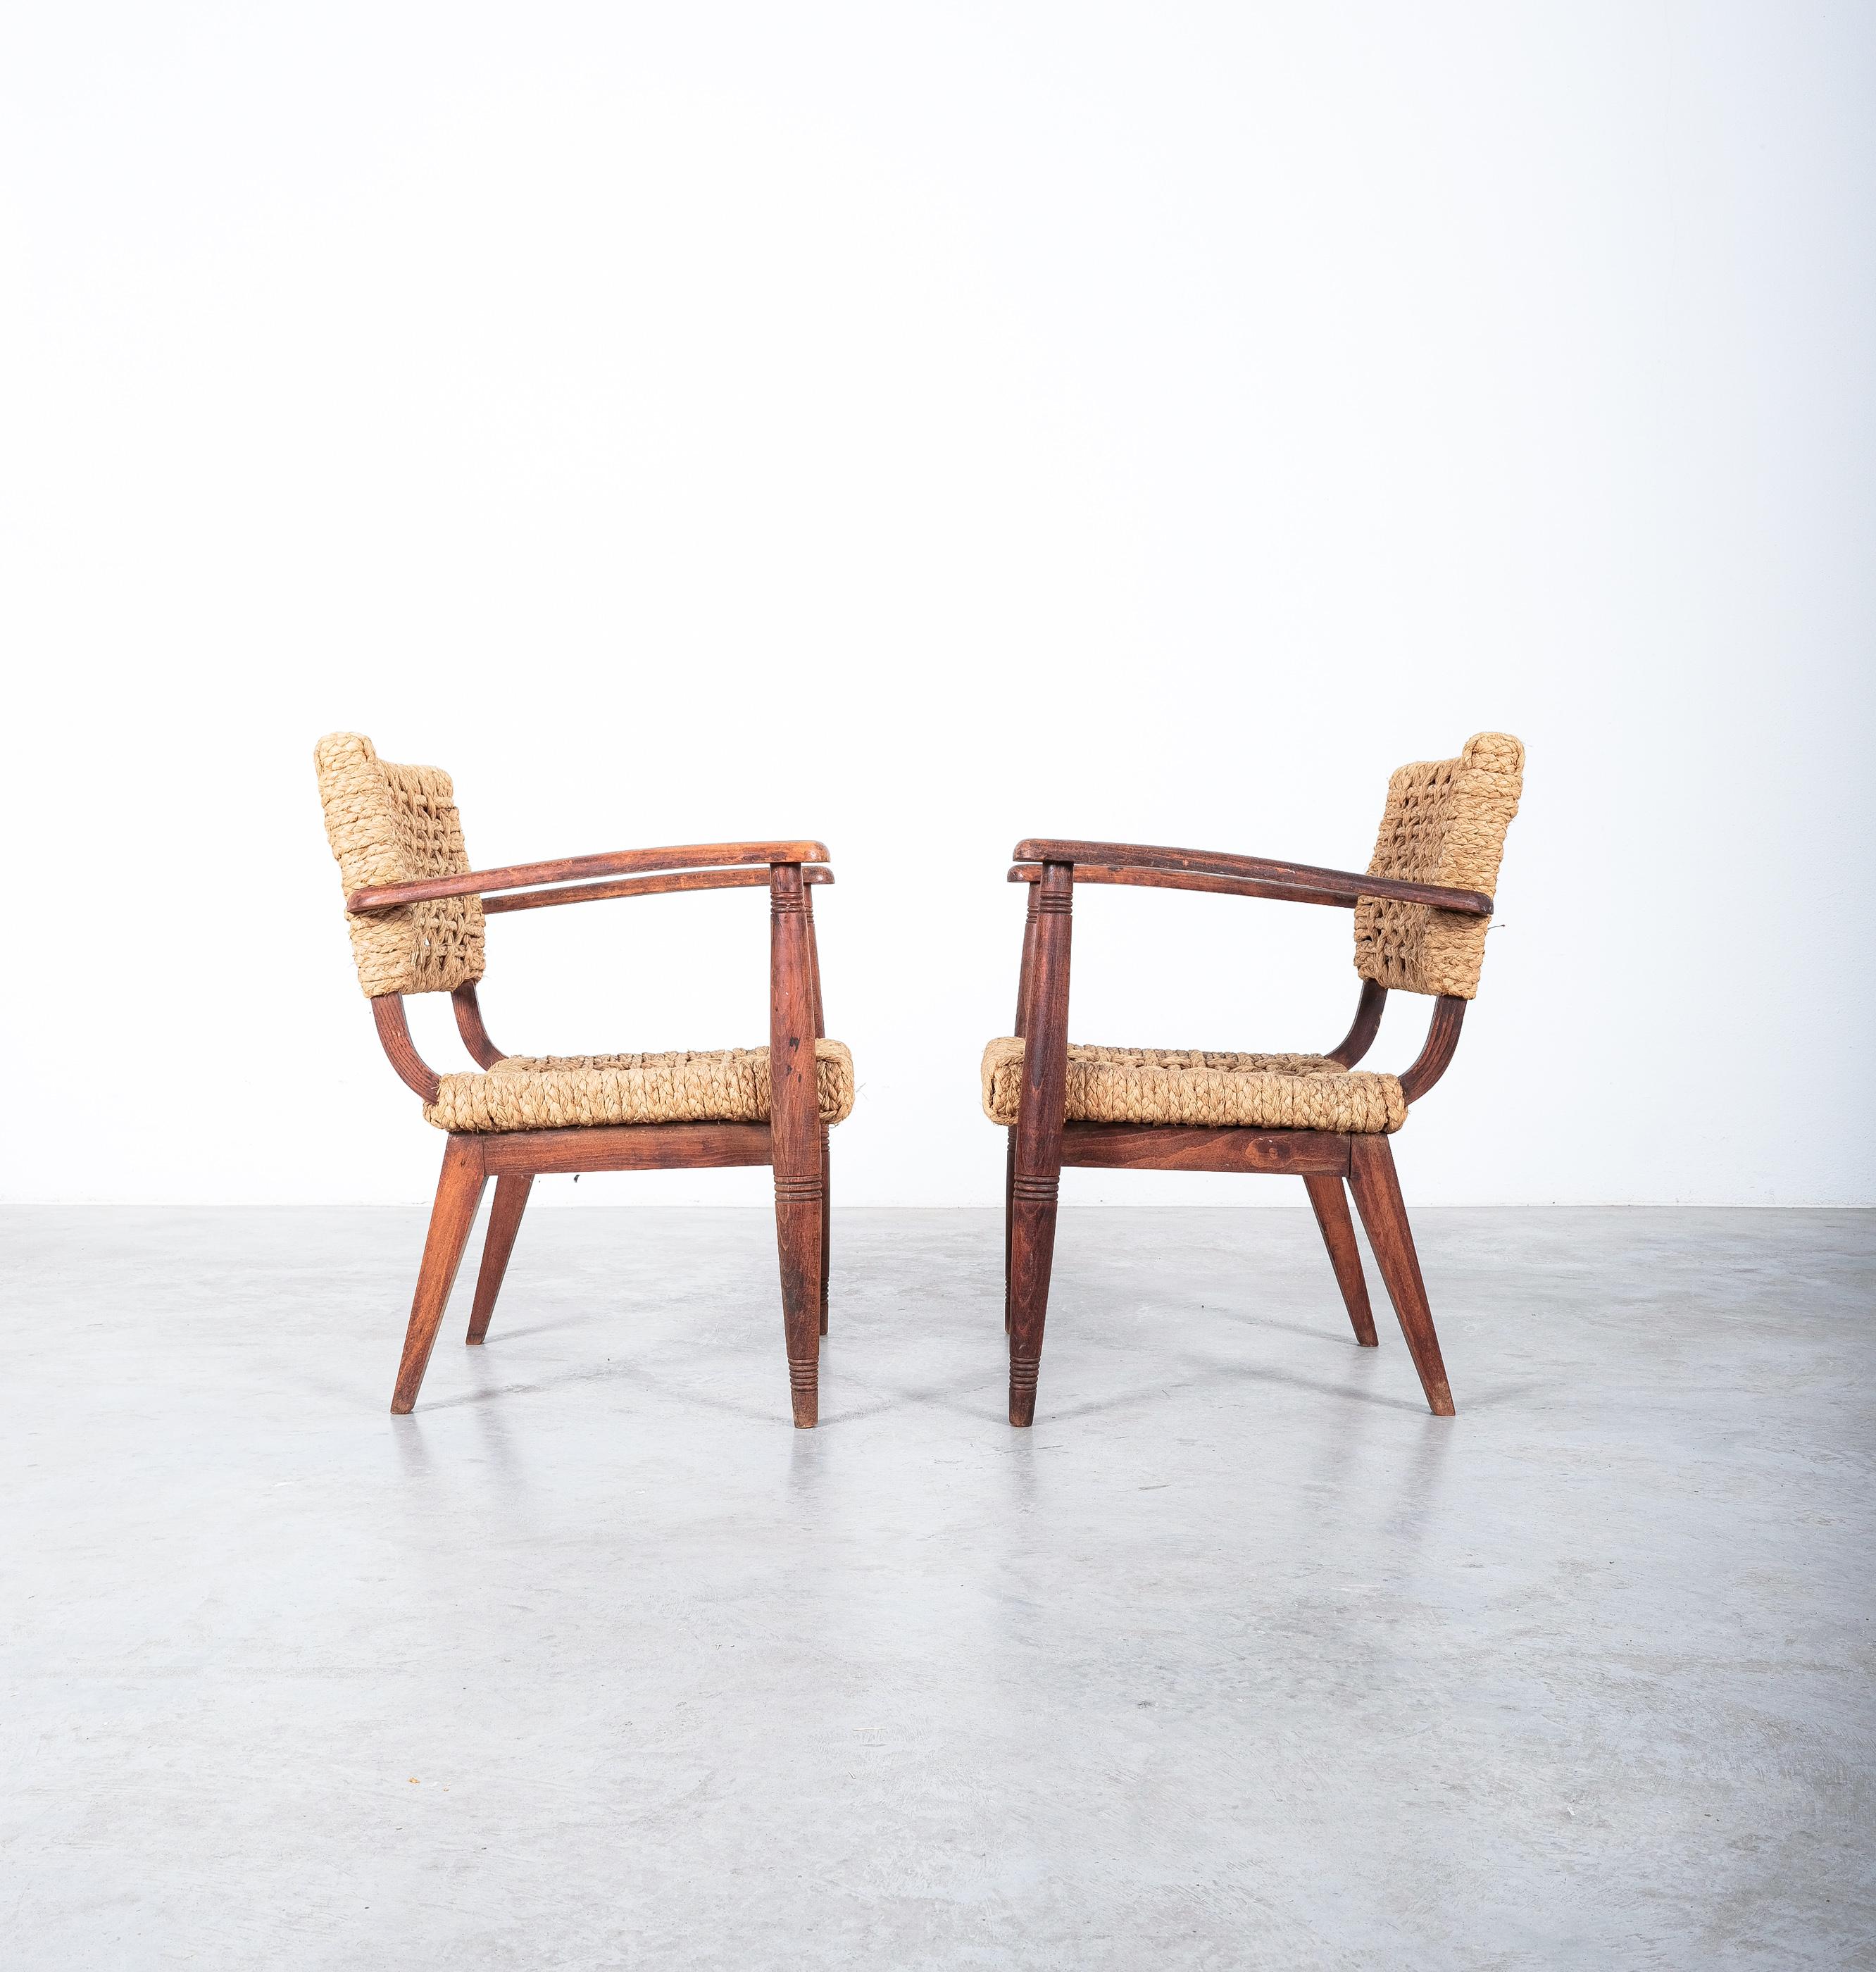 Adrien Audoux and Frida Minet for Vibo, pair of armchairs, beech, rope hemp, France, 1950s.

Gorgeous set of 2 identical arm-chairs, mid-century, by renowned French Designers Adrien Audoux and Frida Minet. The seating and backrest are made of